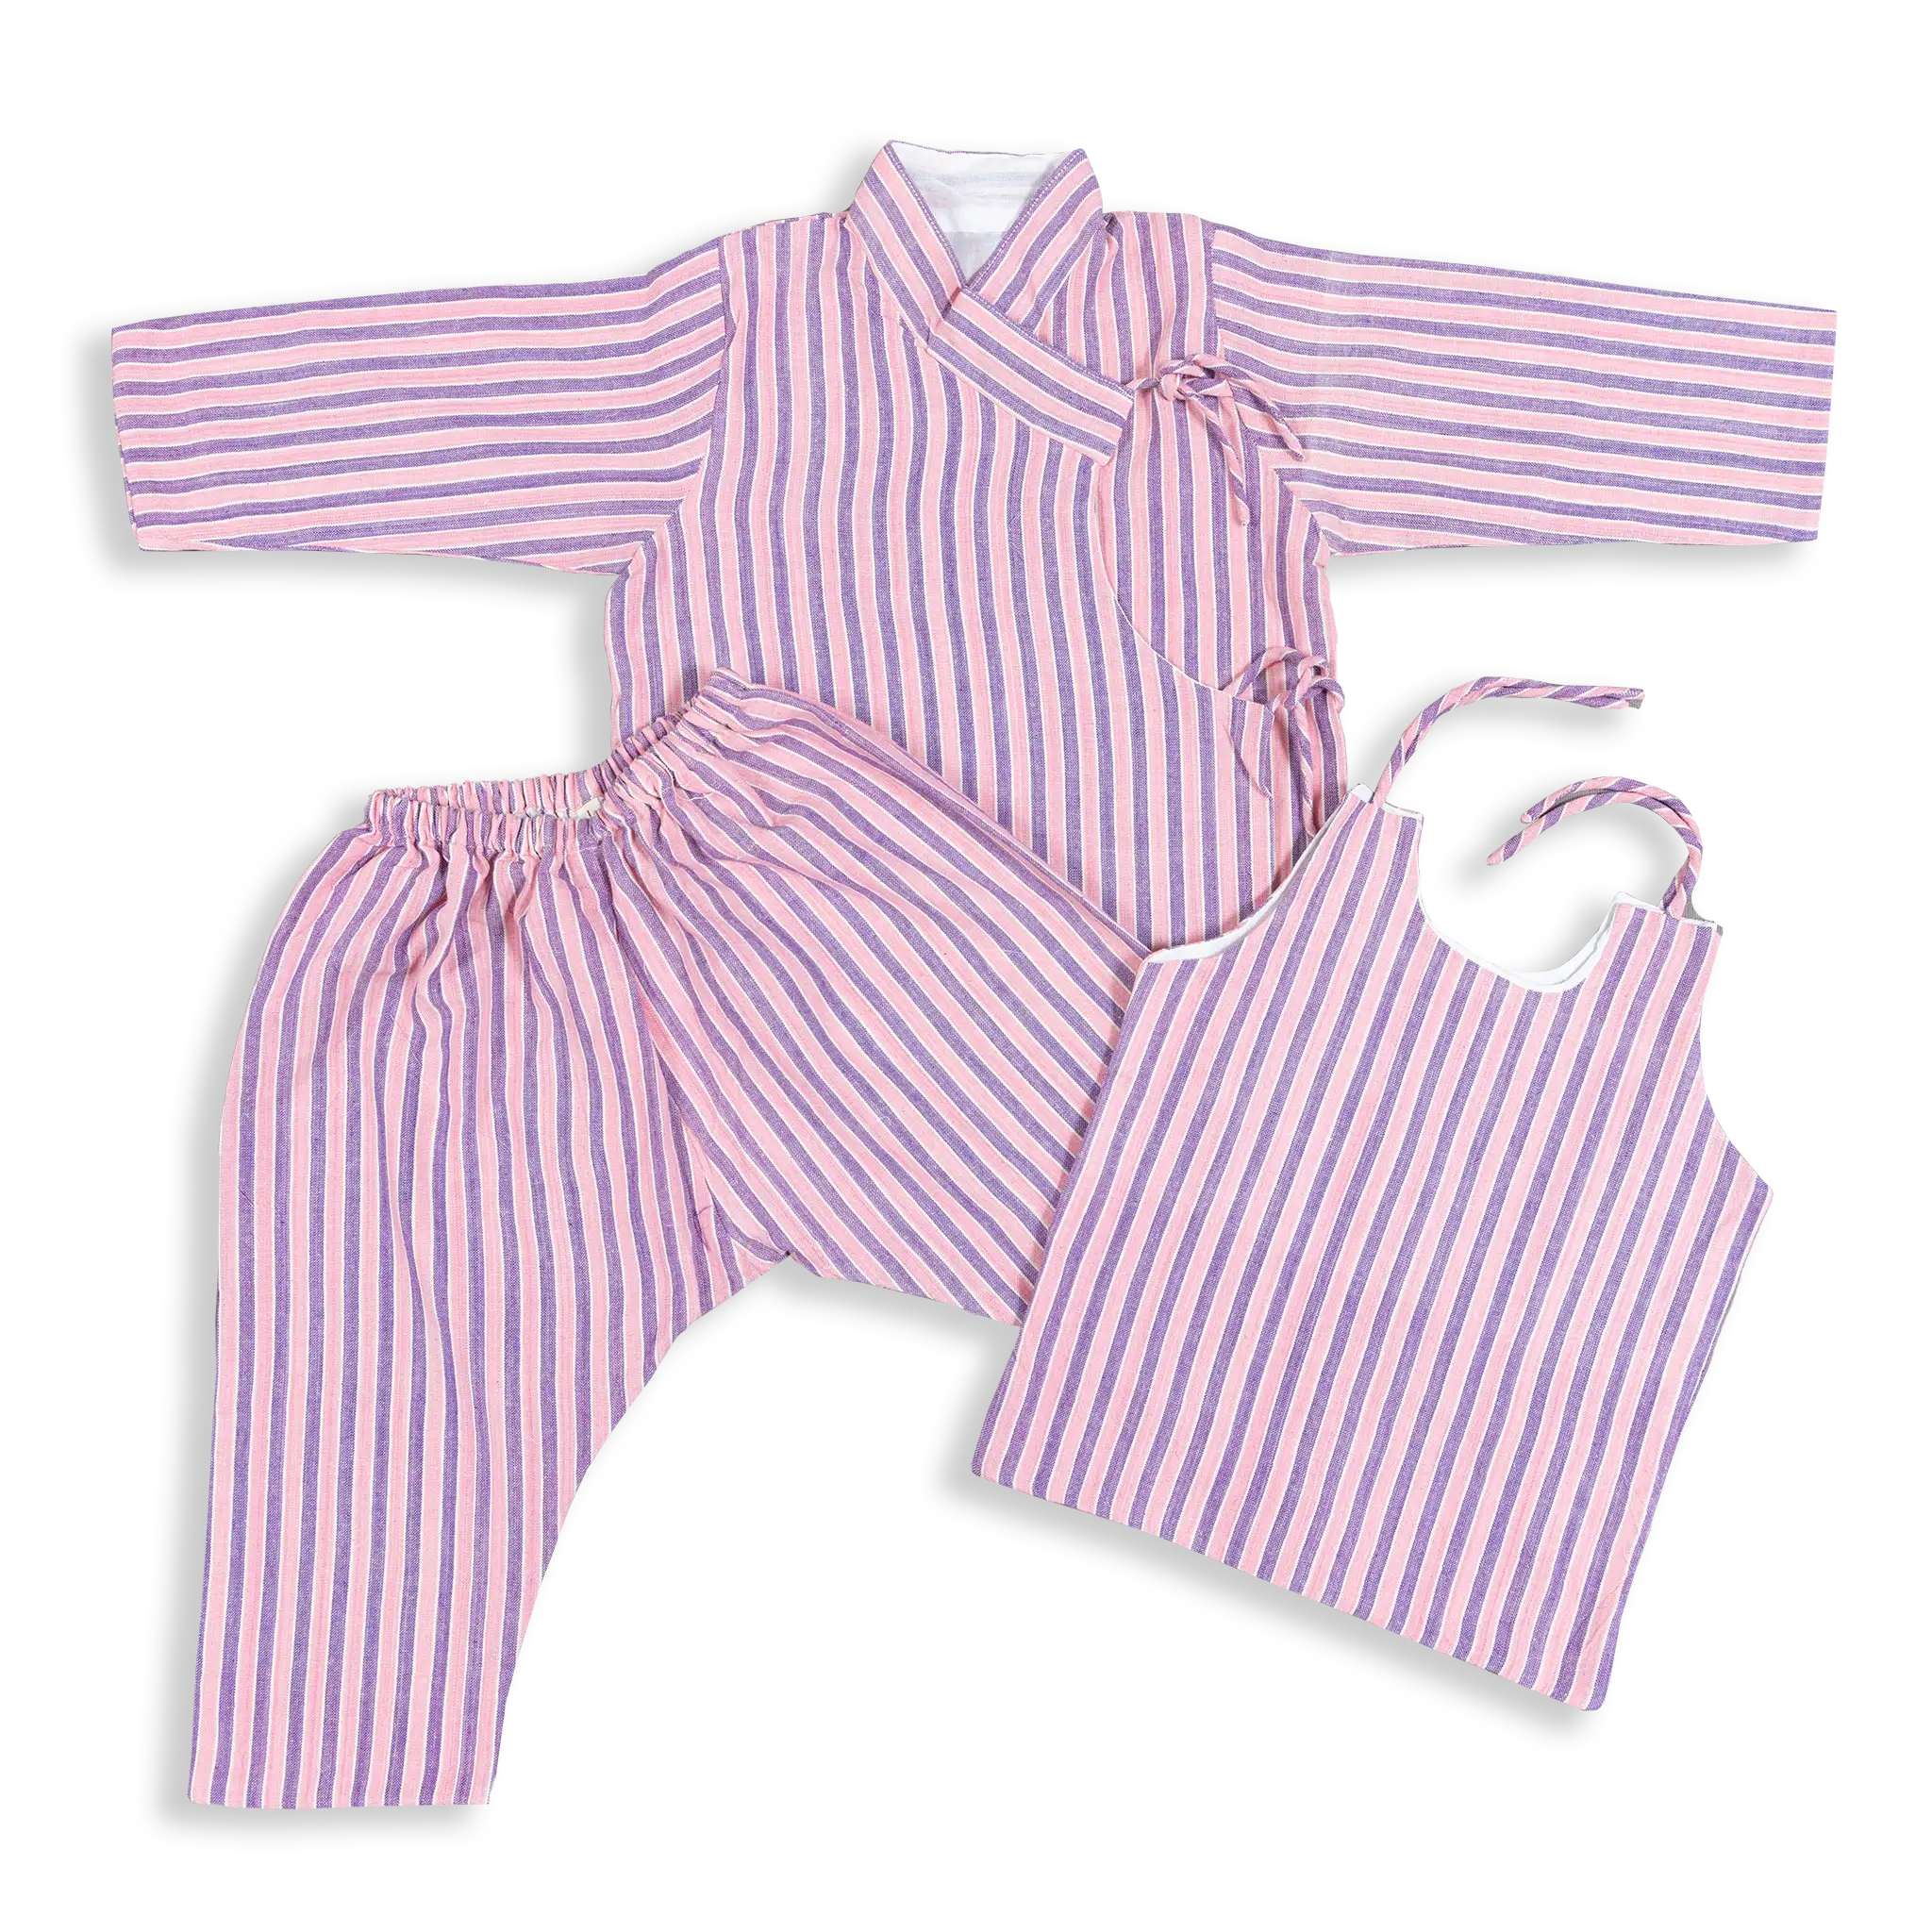 Traditional Nepali trousers, Bhoto and Overcoat  in a centuries-old design called Daura Suruwal lined with breathable fine muslin to protect the toddler from cold or heat.